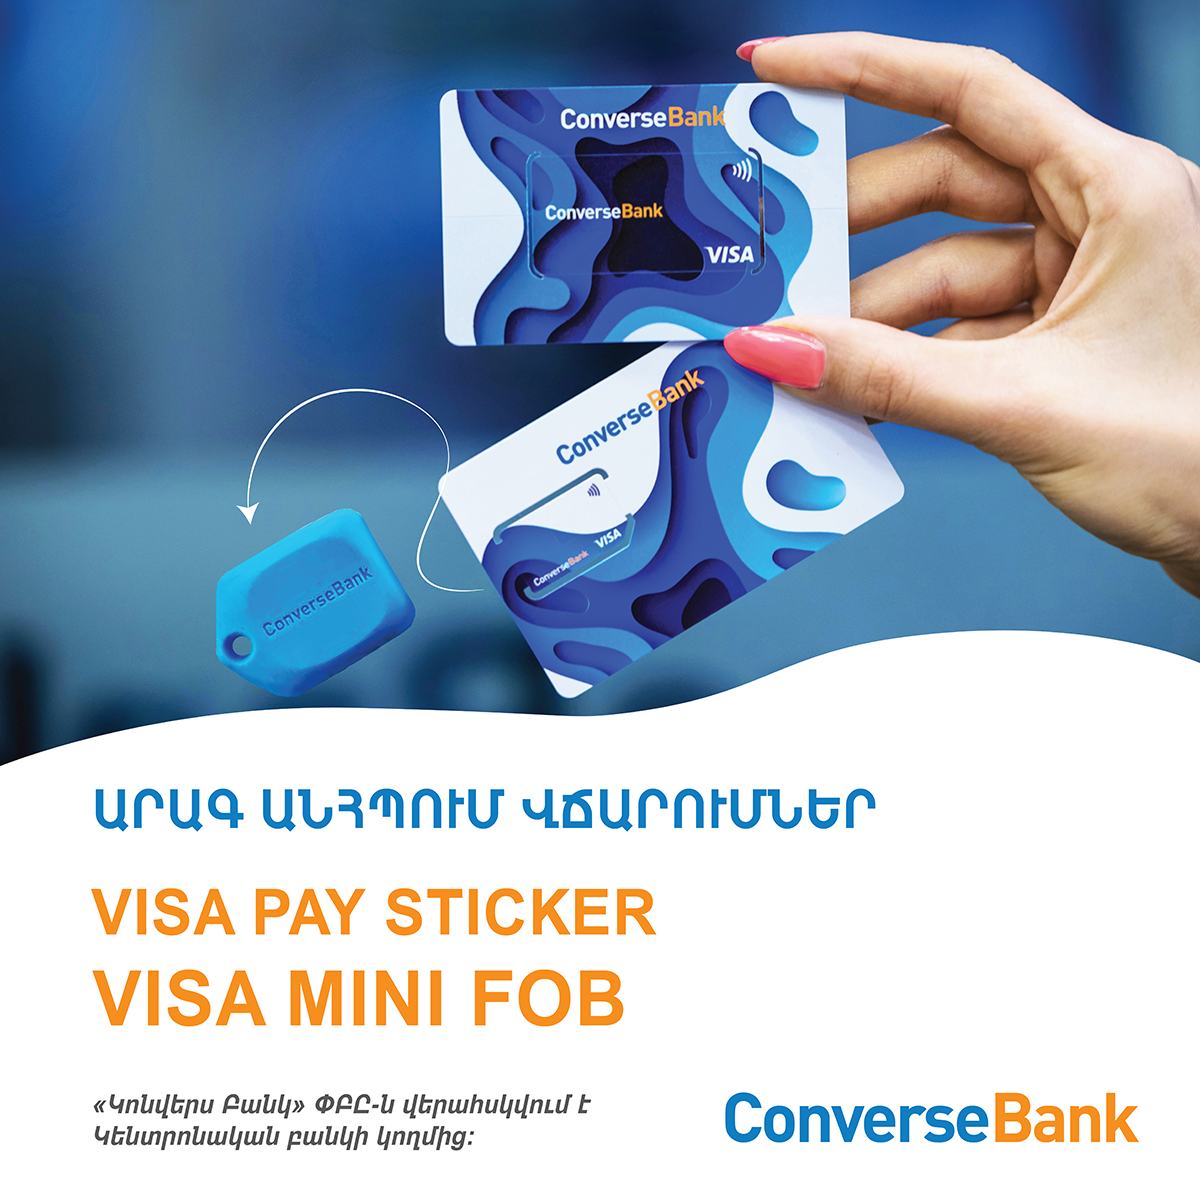 Visa Mini Fob - Converse Bank's interesting offer to its customers 1